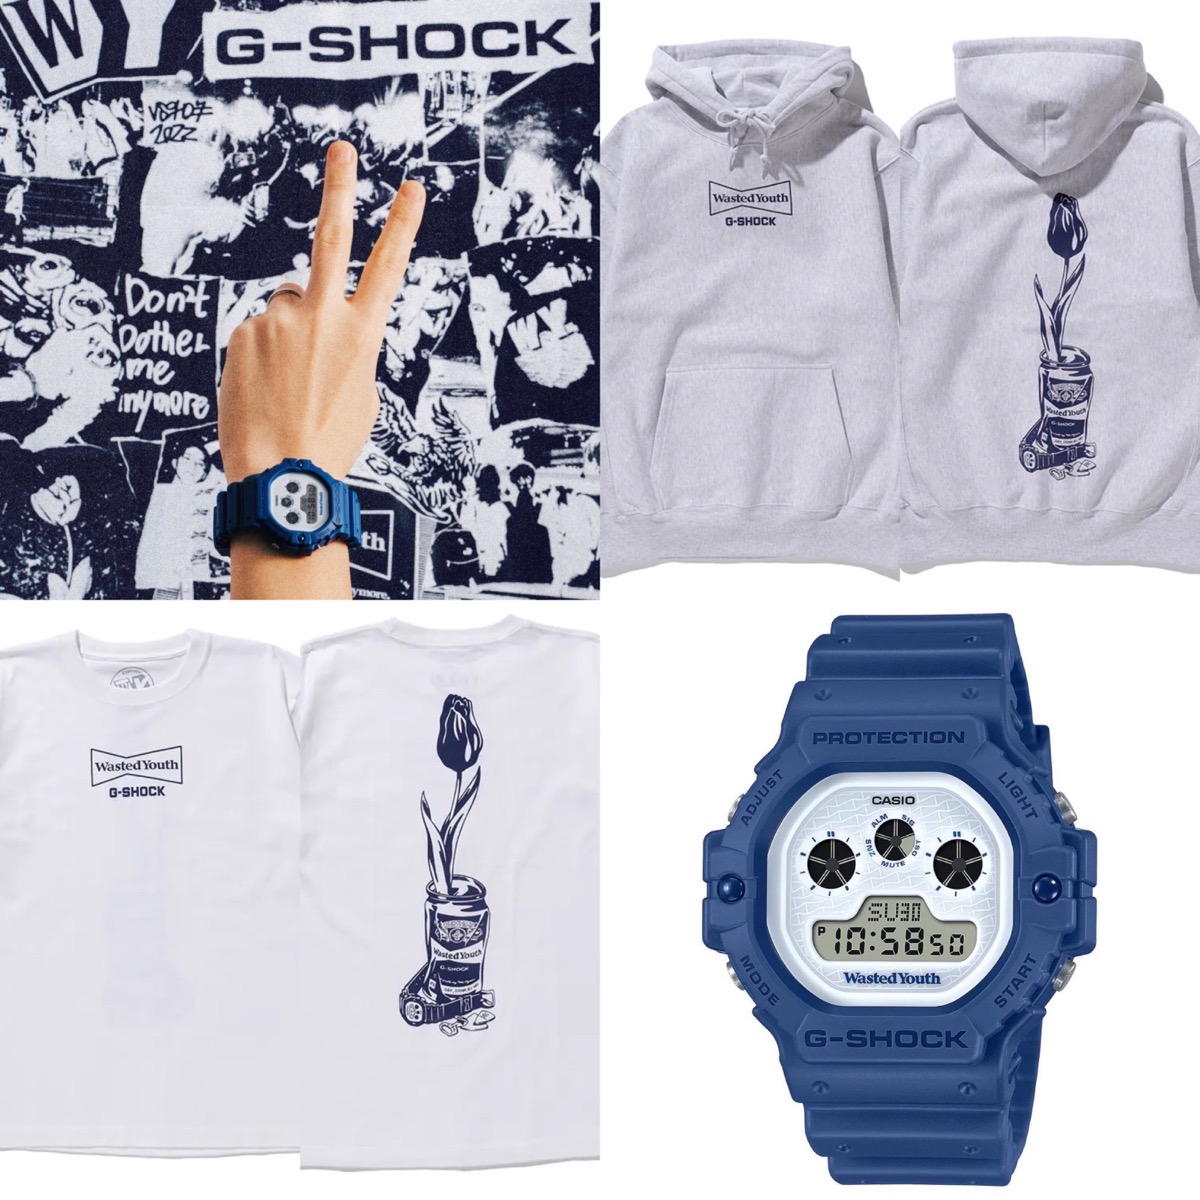 wasted youth g-shock コラボパーカー